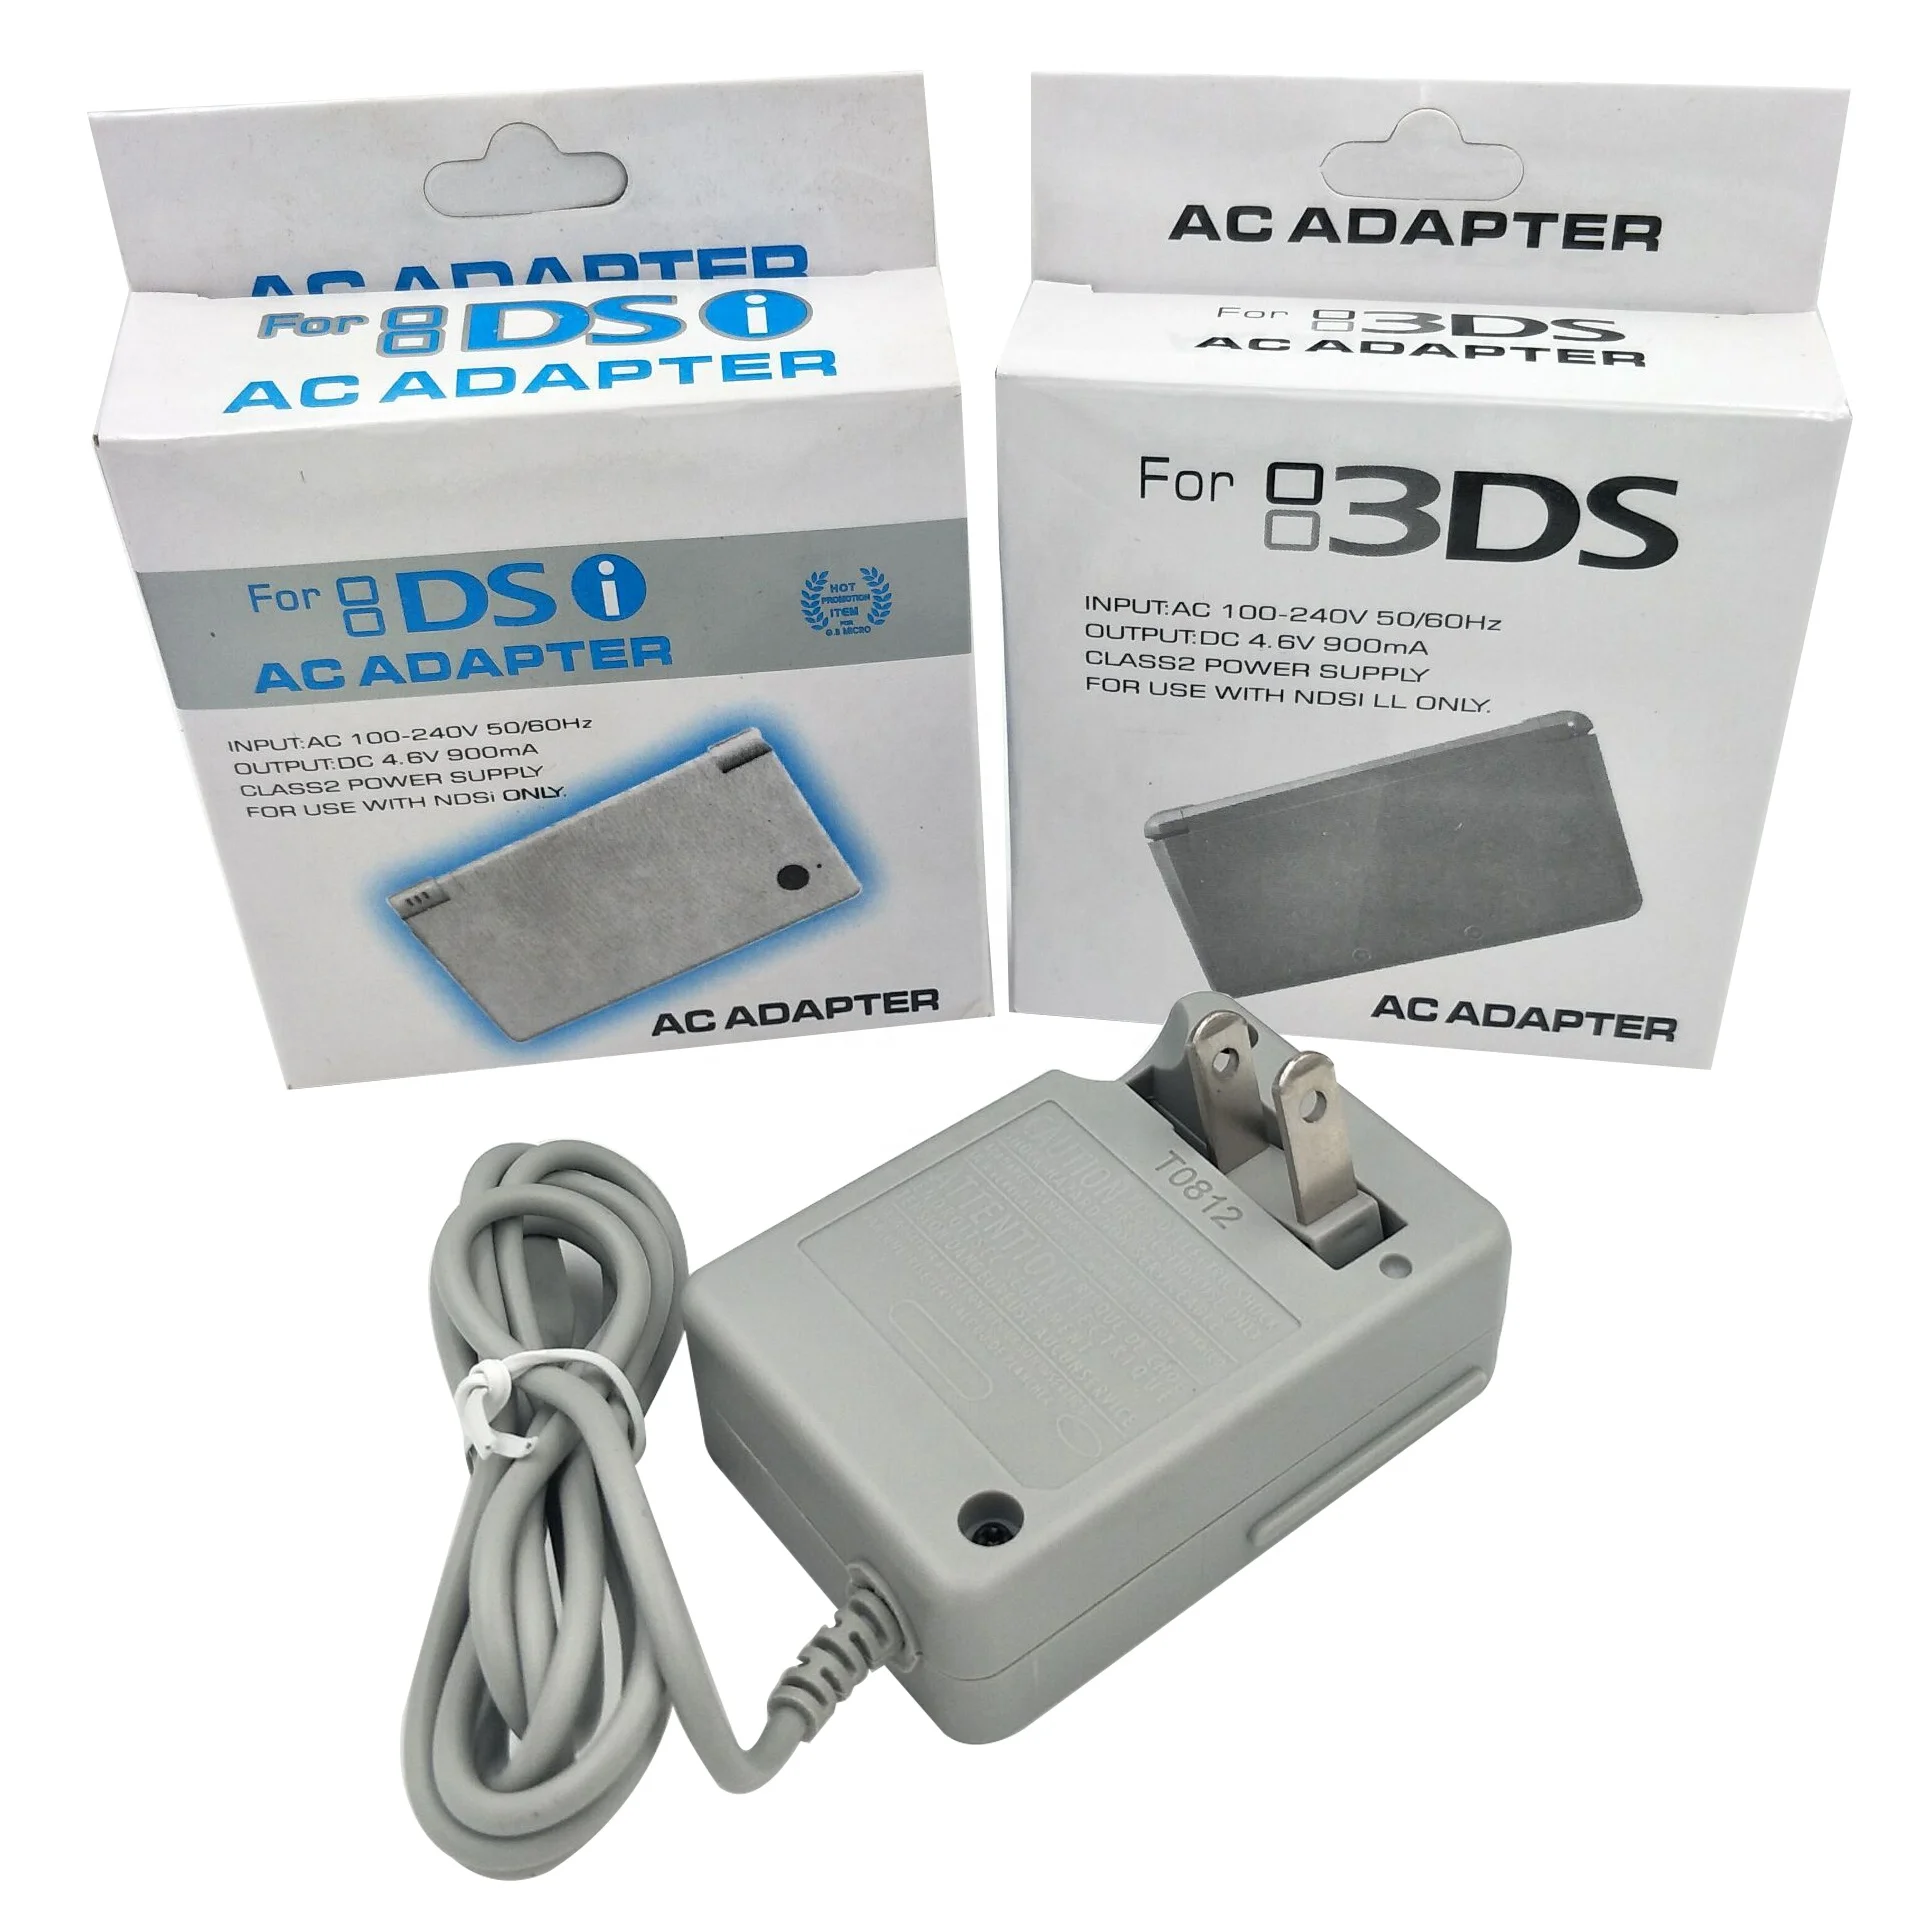 Nintendo Wall Charger for DSi, 2DS, 3DS, DSi XL, systems – Battery World